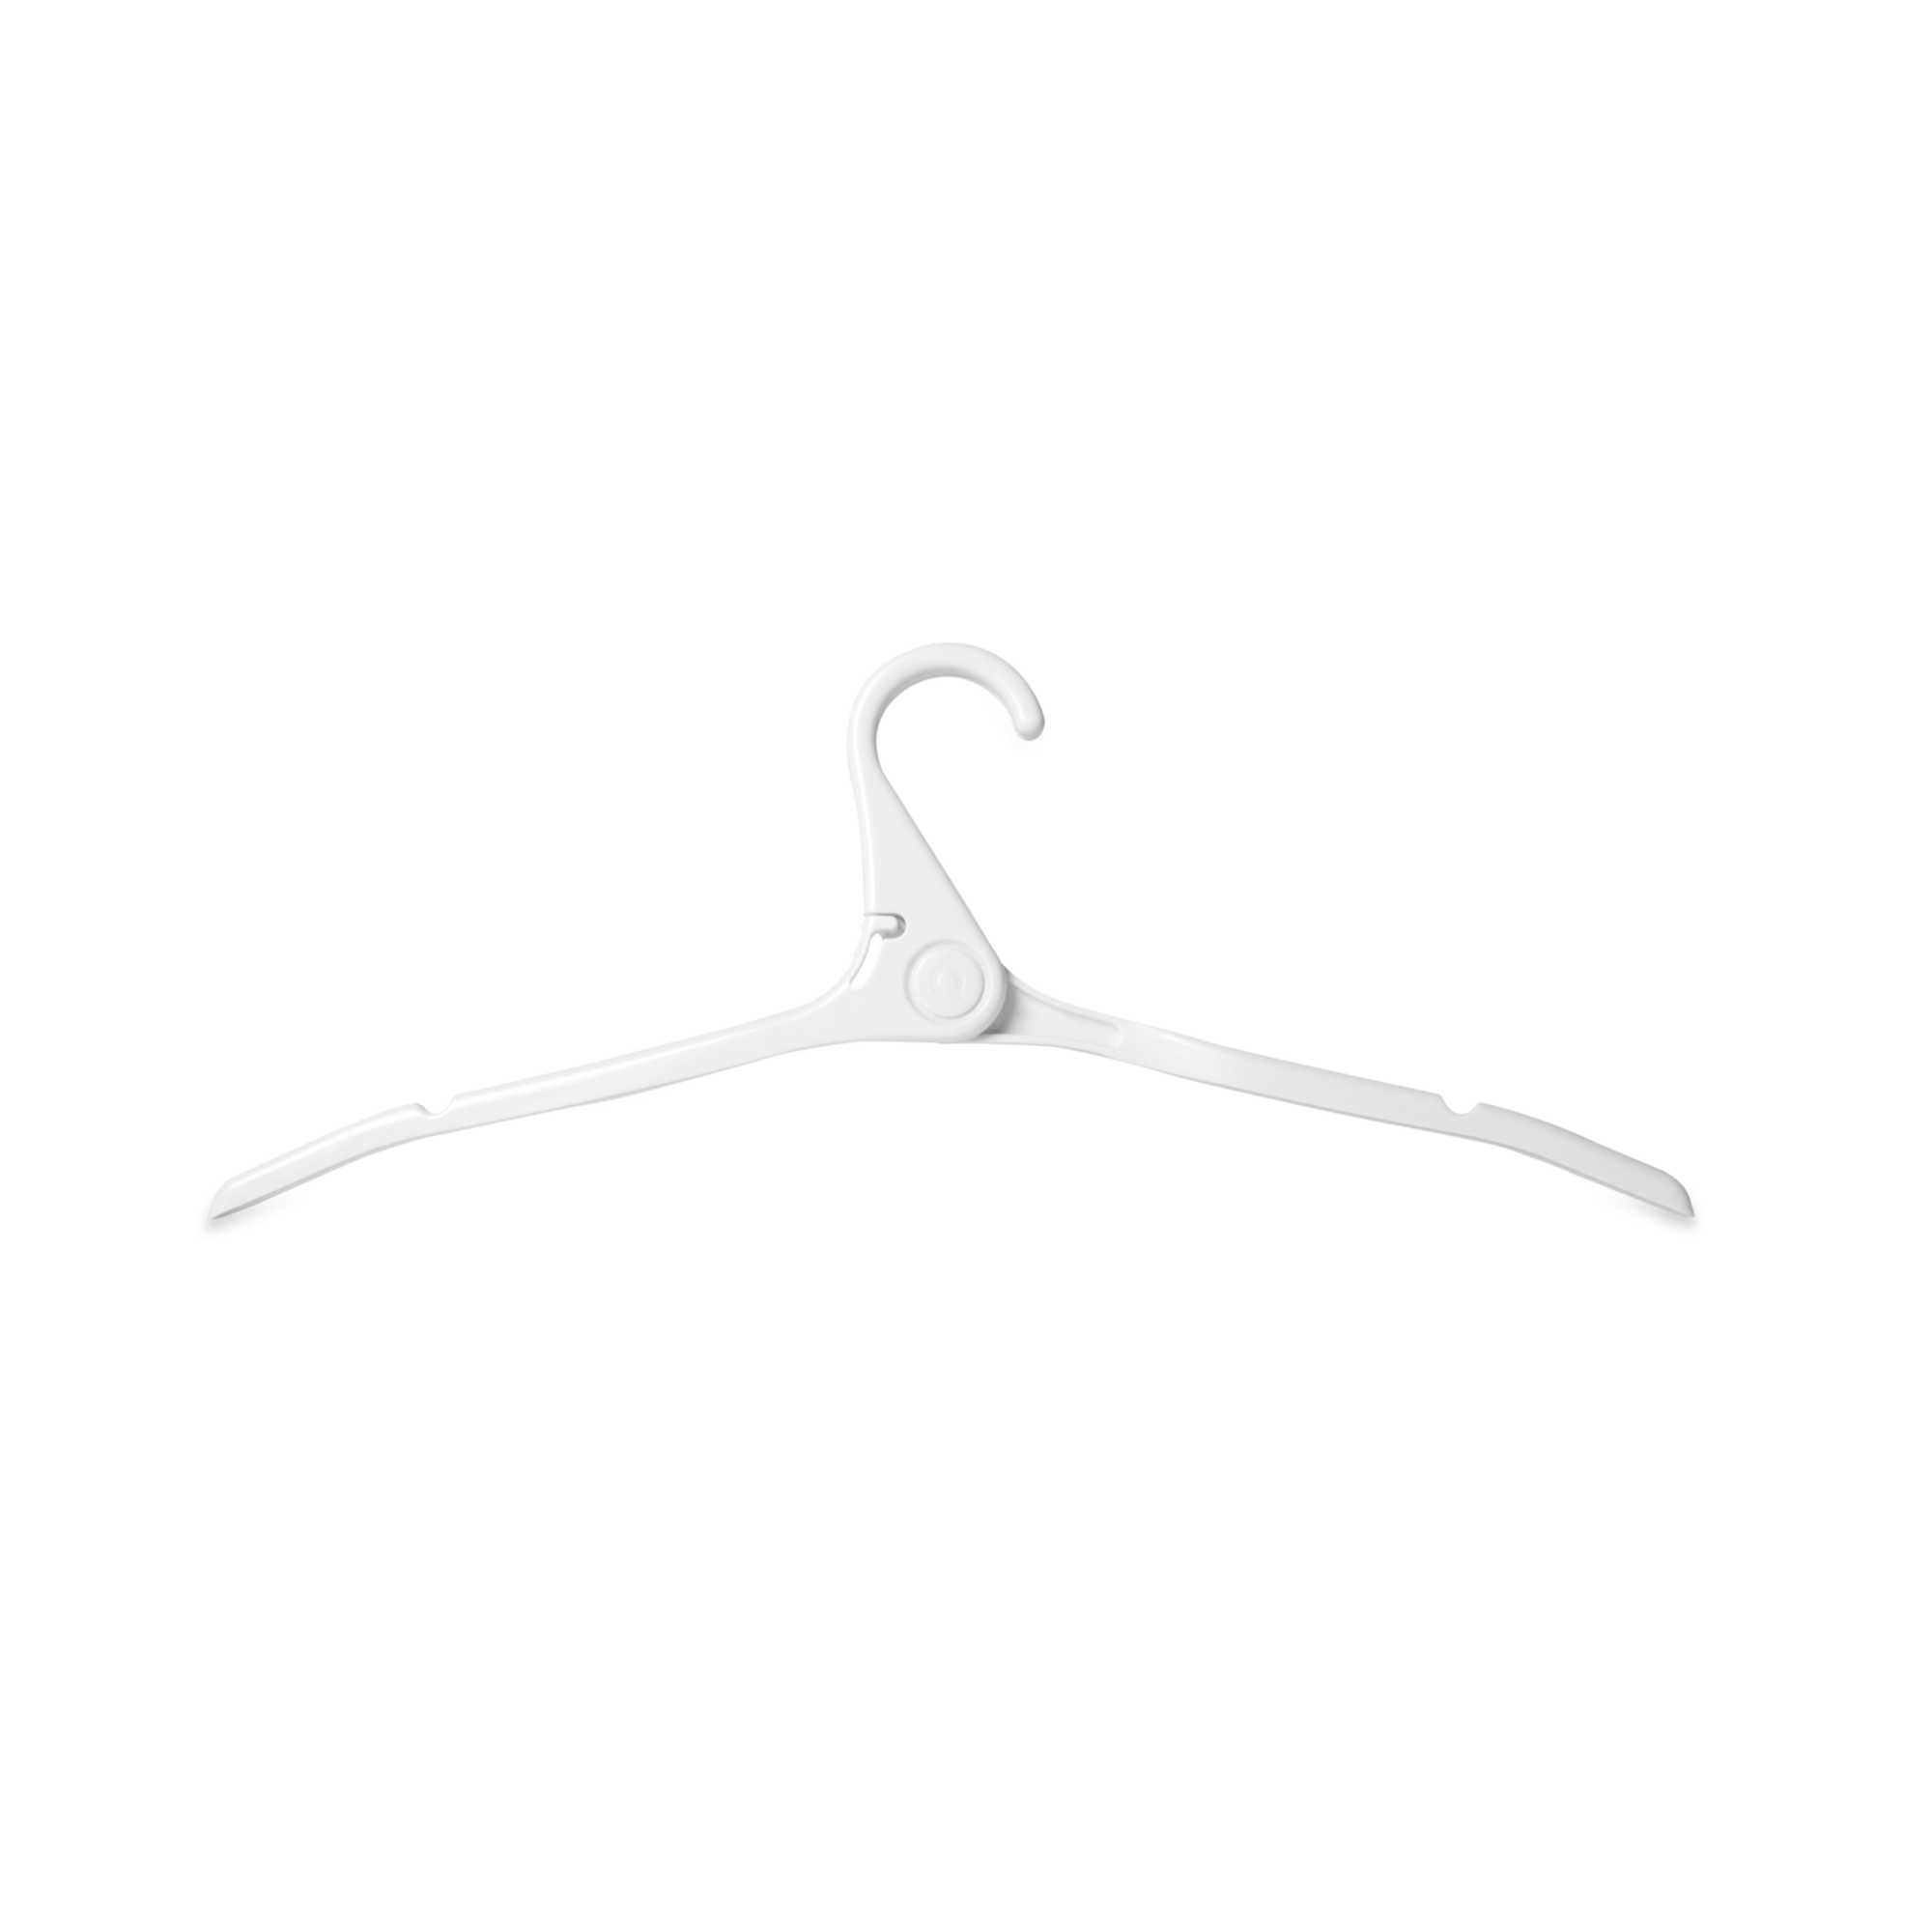 Quirky PSOL2-WH01 Solo Collapsible Hanger White - Set of 4 